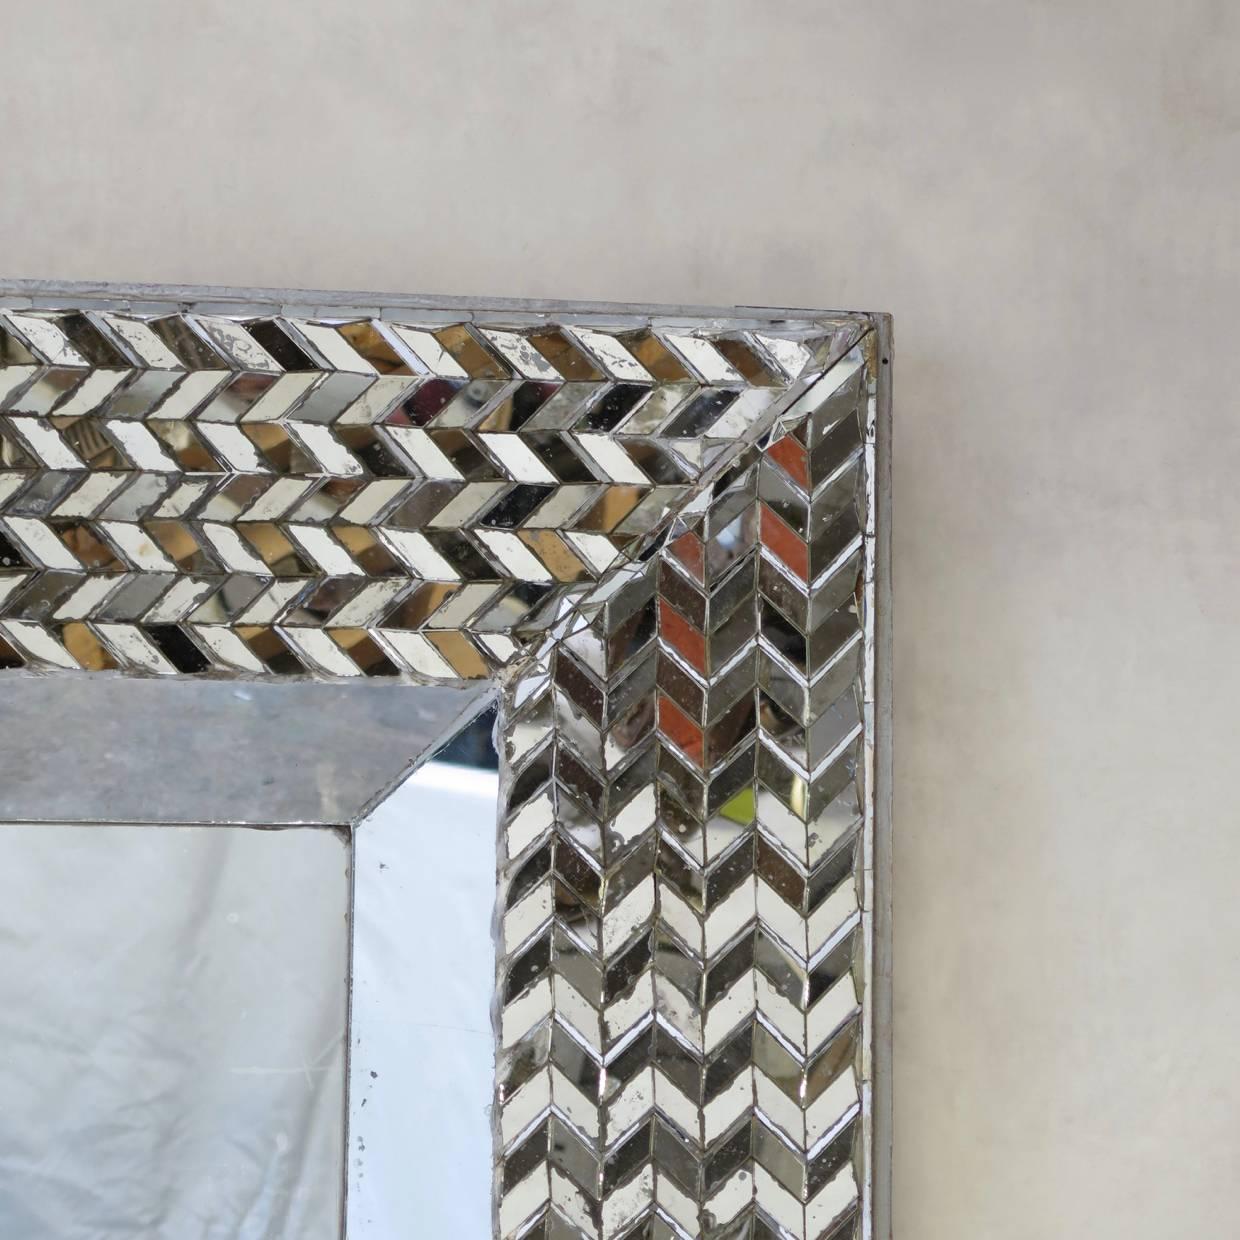 Rare and striking large square looking-glass entirely clad in mirrored surfaces. The center is slightly depressed and set within a bold frame, forming a chevron motif. This is definitely a statement piece!